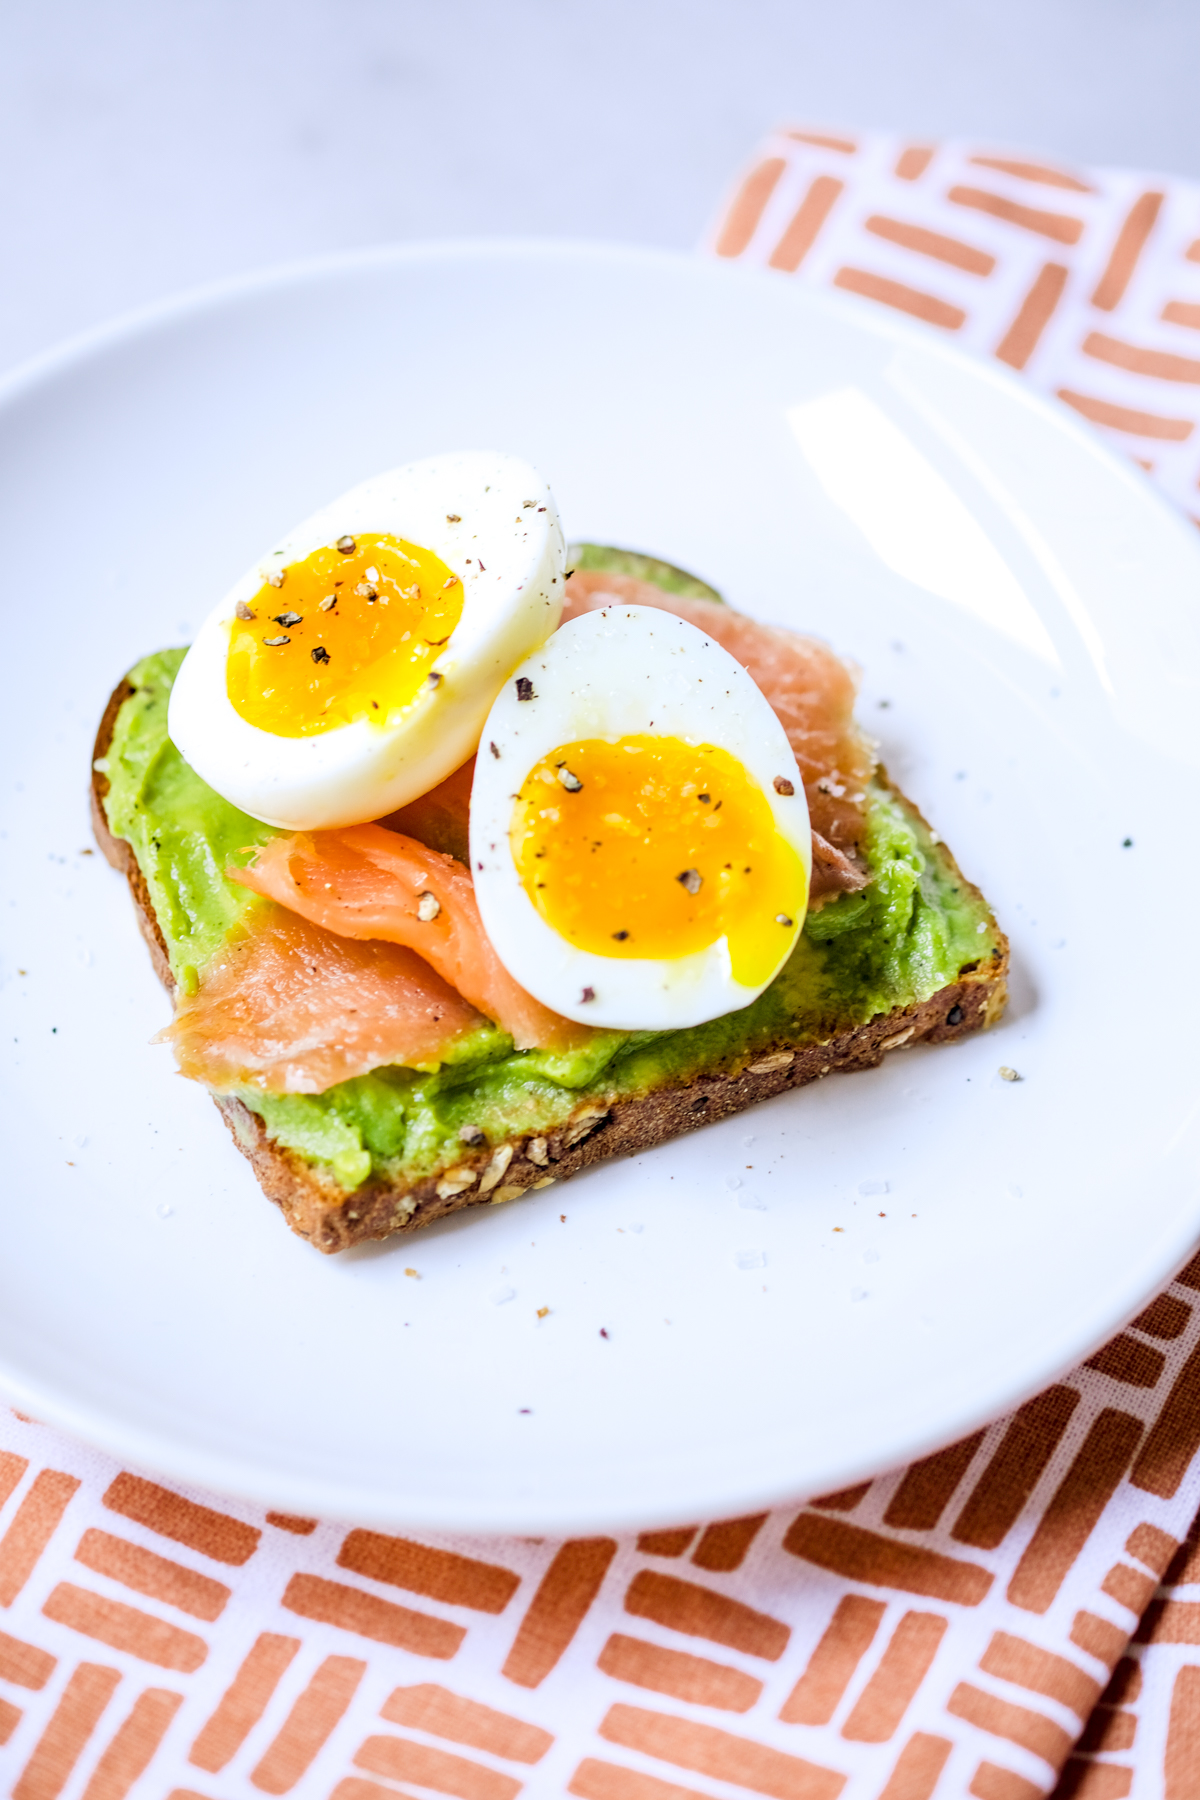 Salmon, Avocado And Poached Egg Sandwich, Healthy Eating Stock Photo ...